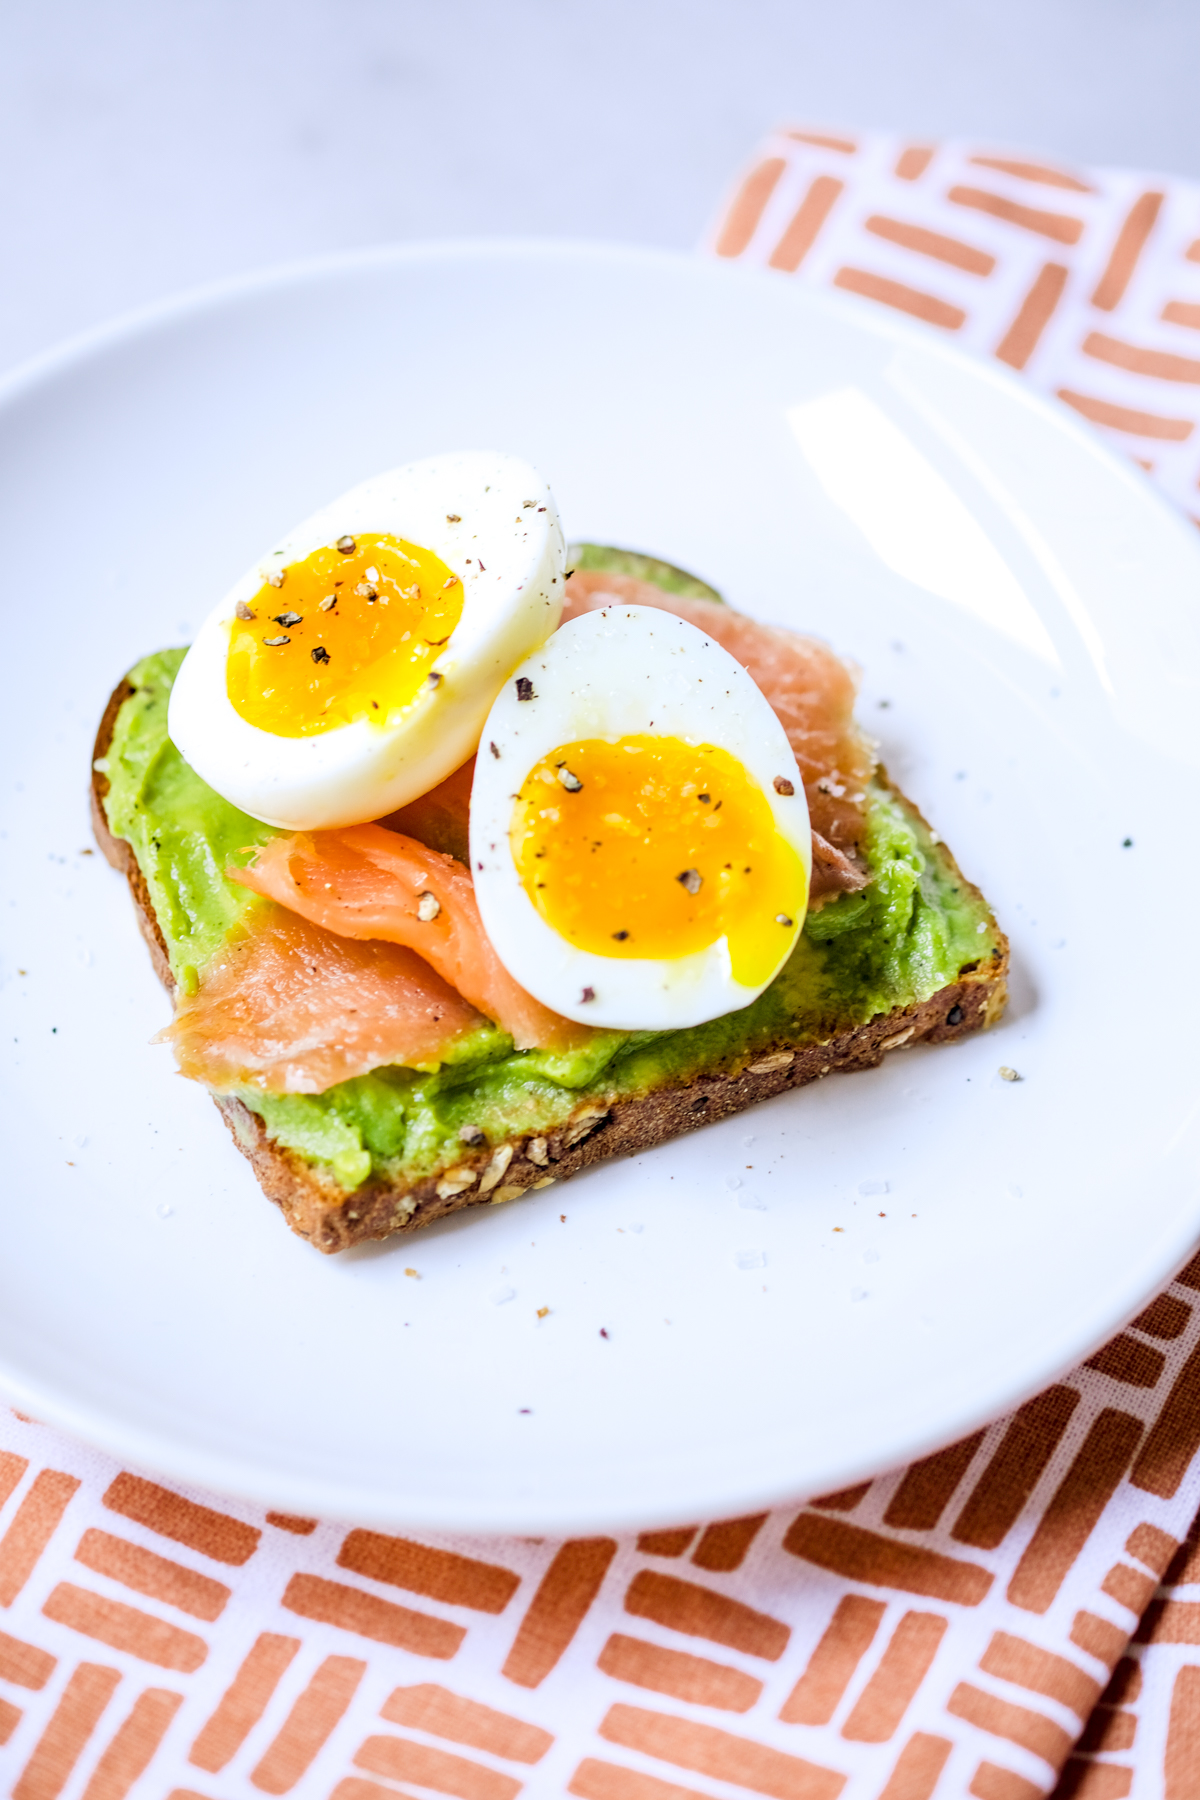 Salmon, Avocado And Poached Egg Sandwich, Healthy Eating Stock Photo ...